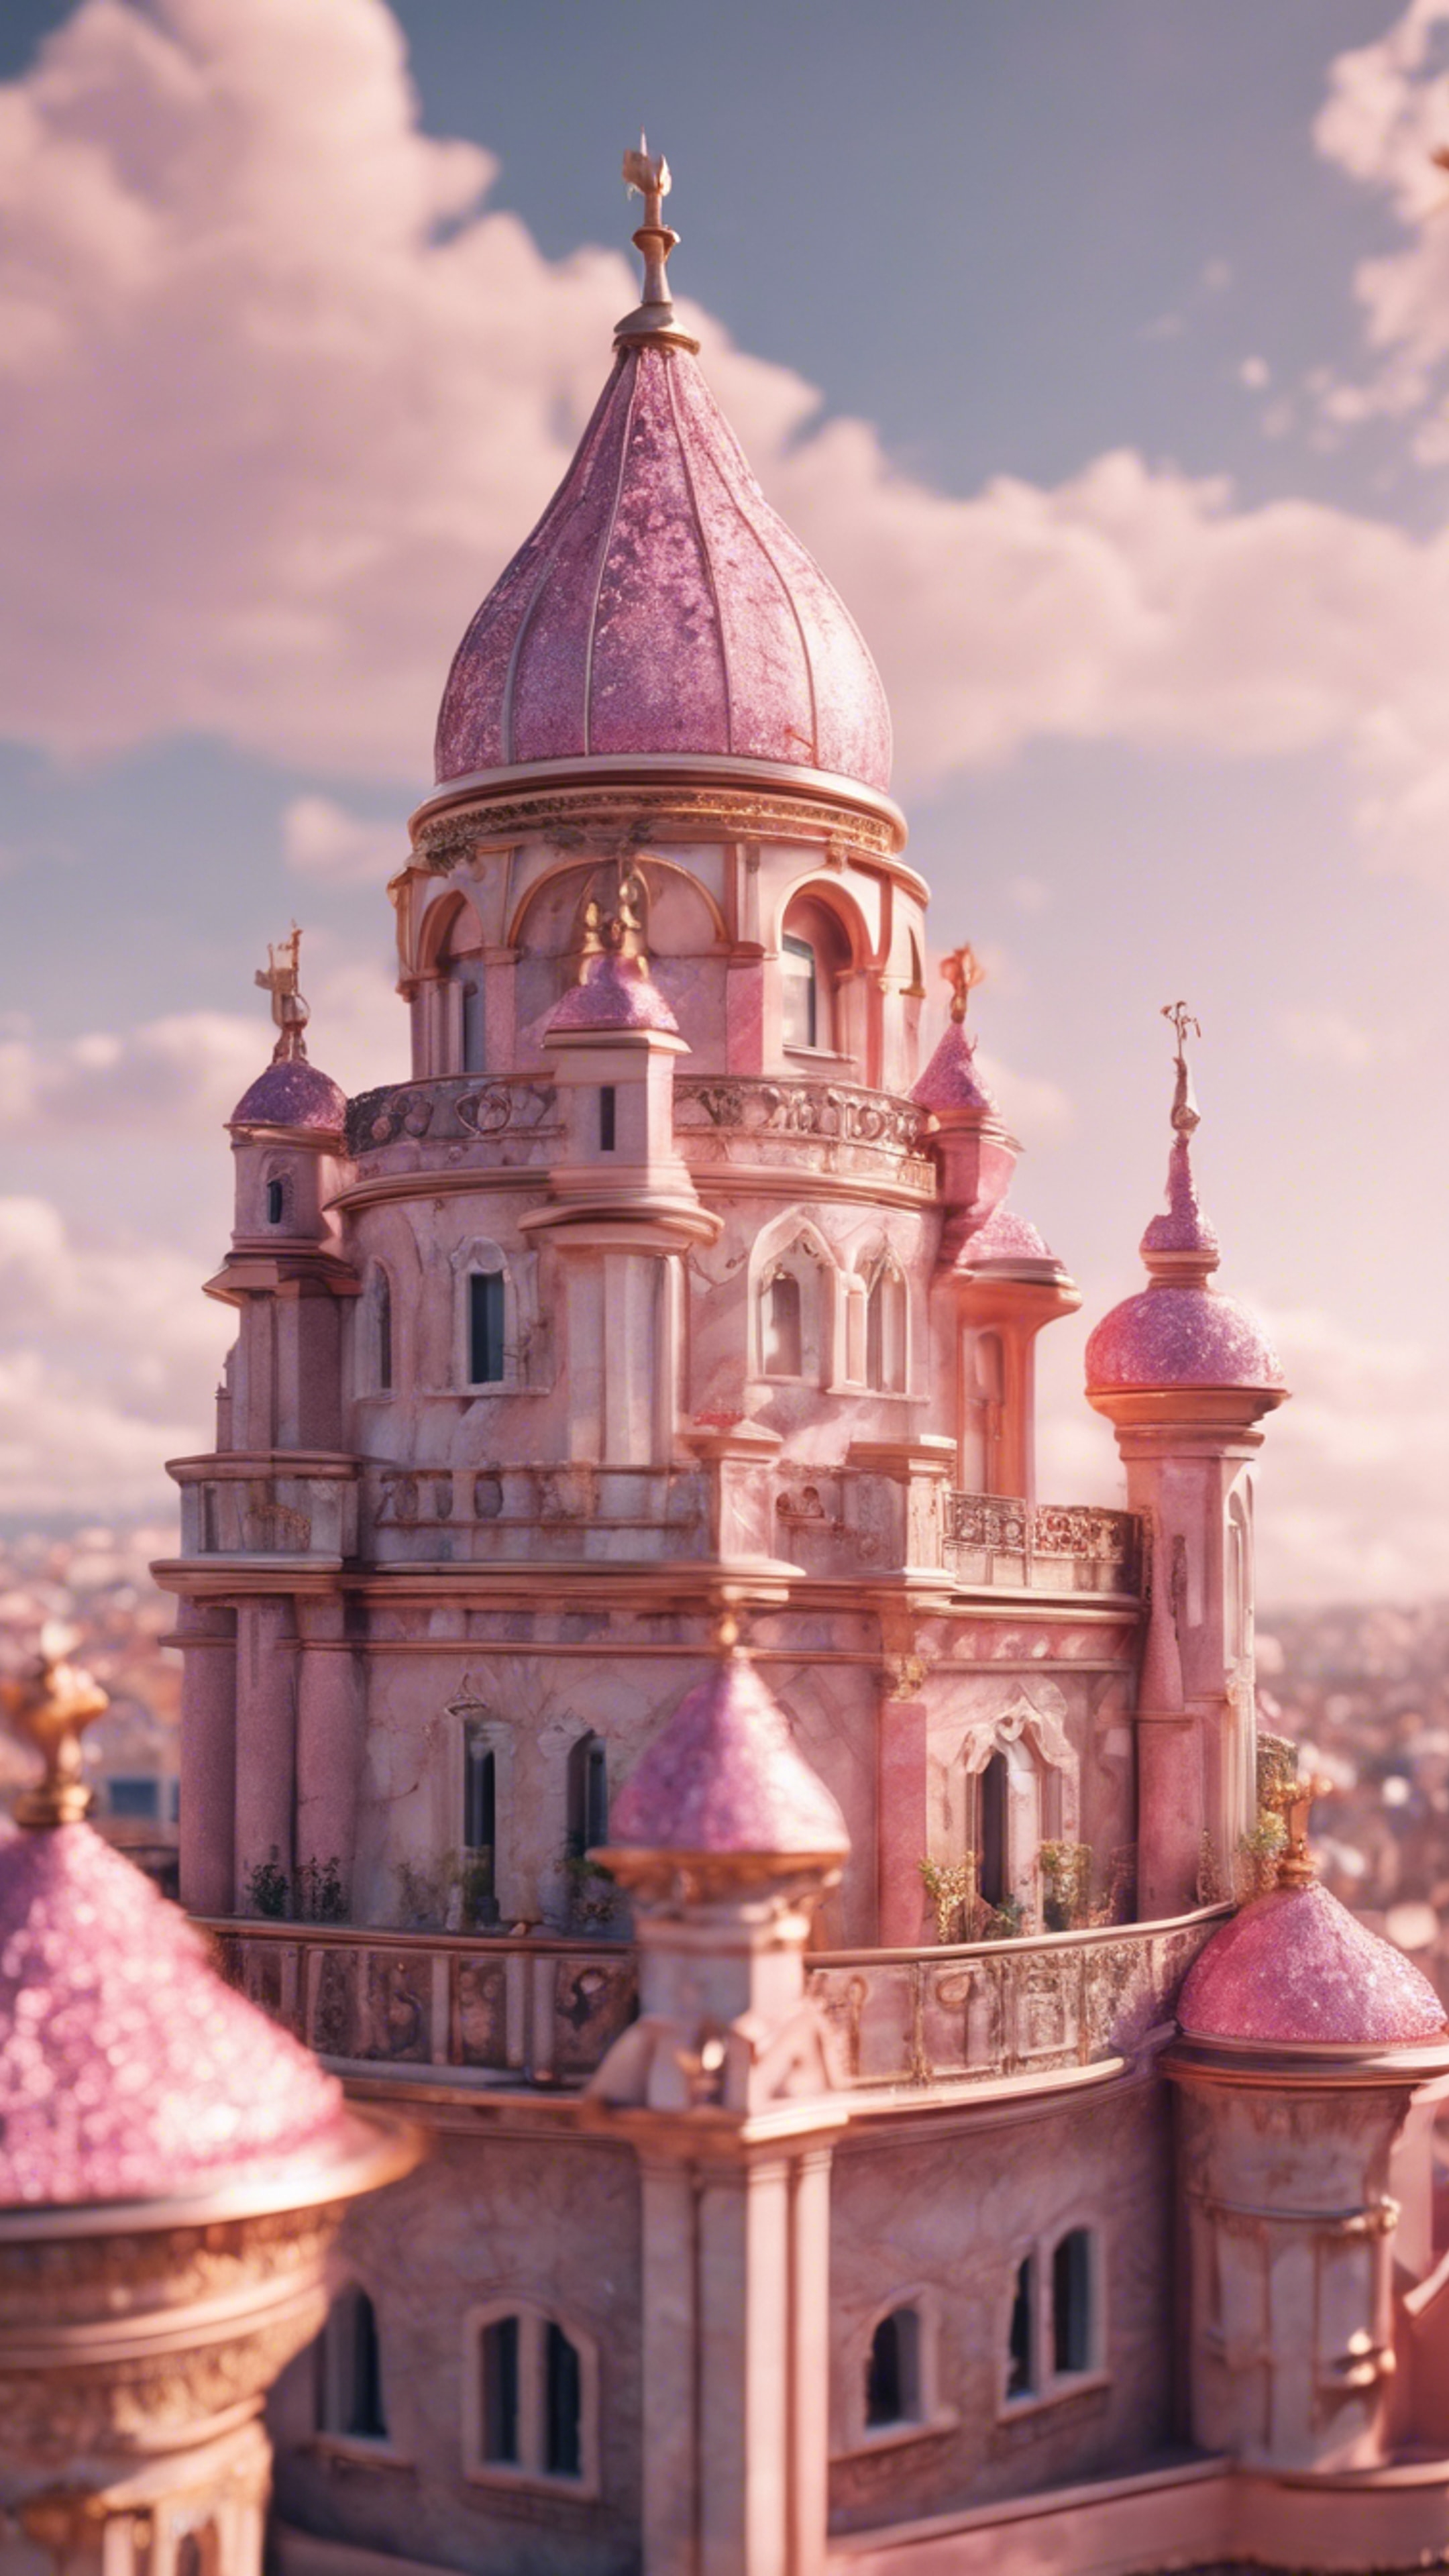 An ornate pink marble castle with glimmering golden rooftops during a sunny afternoon. Sfondo[39cdf807c12f4b9c8dd2]